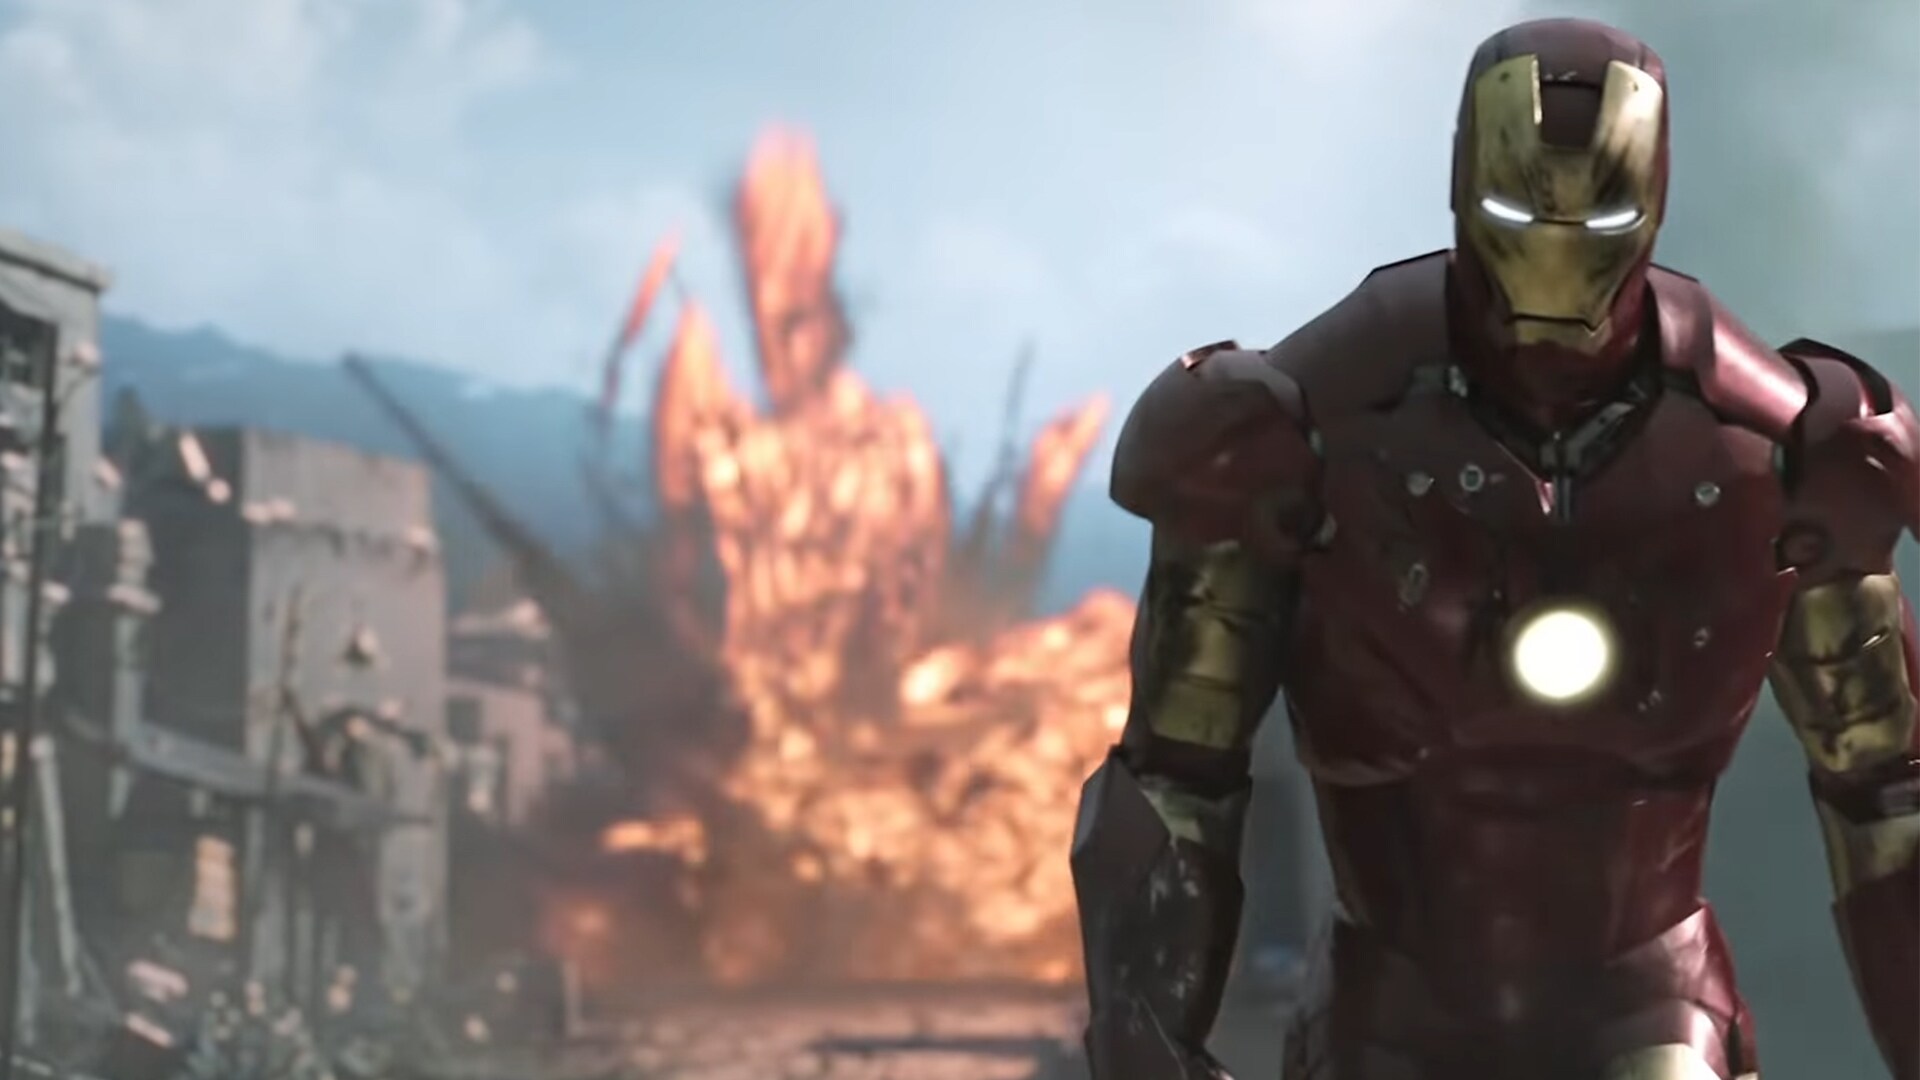 Iron Man walks away from an explosion behind him from Marvel Studios' Iron Man.